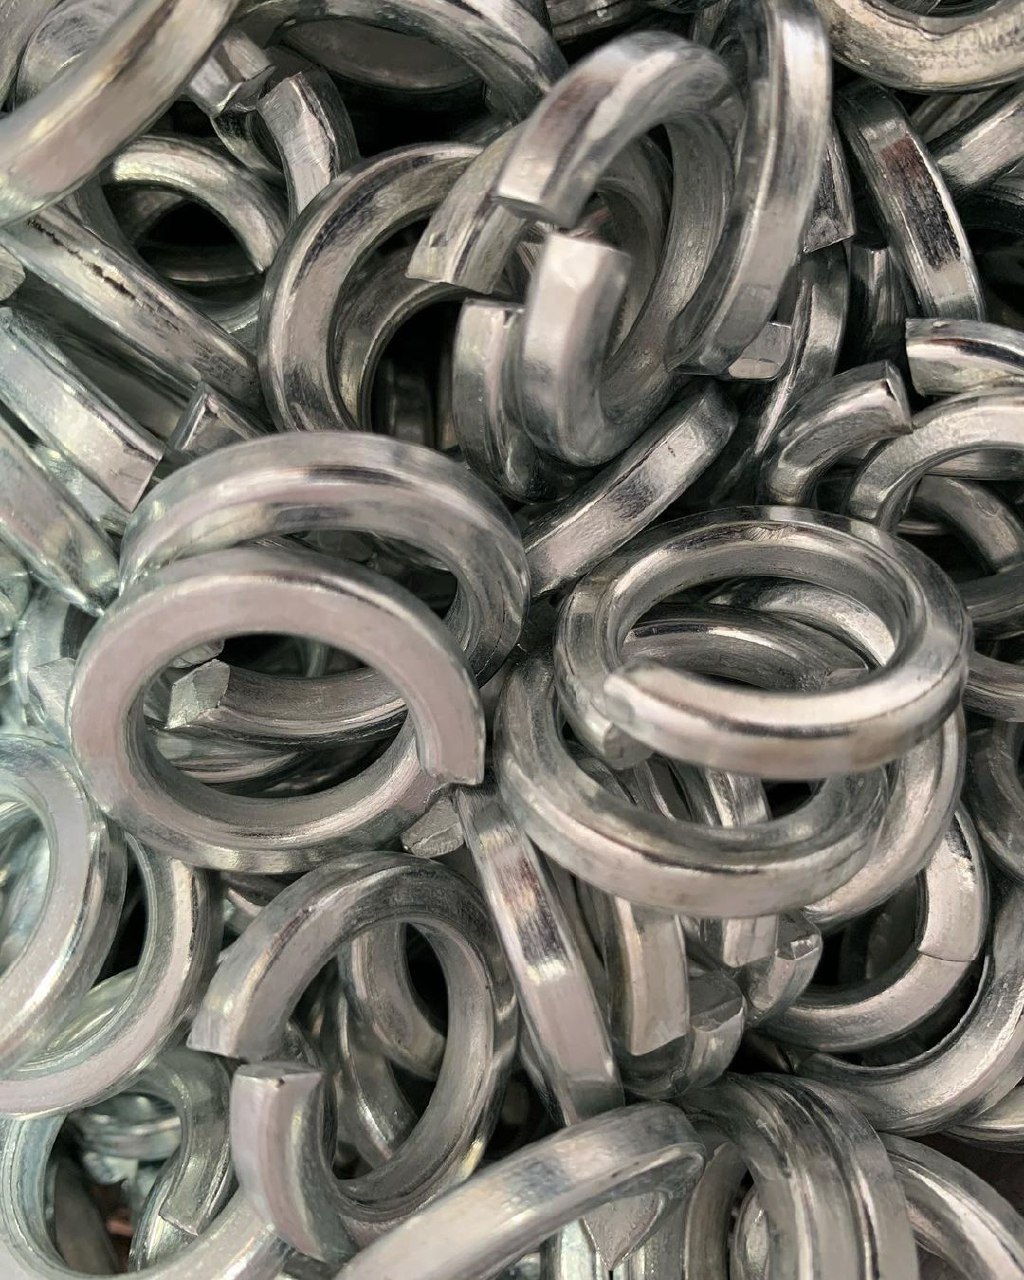 collection of spring washers